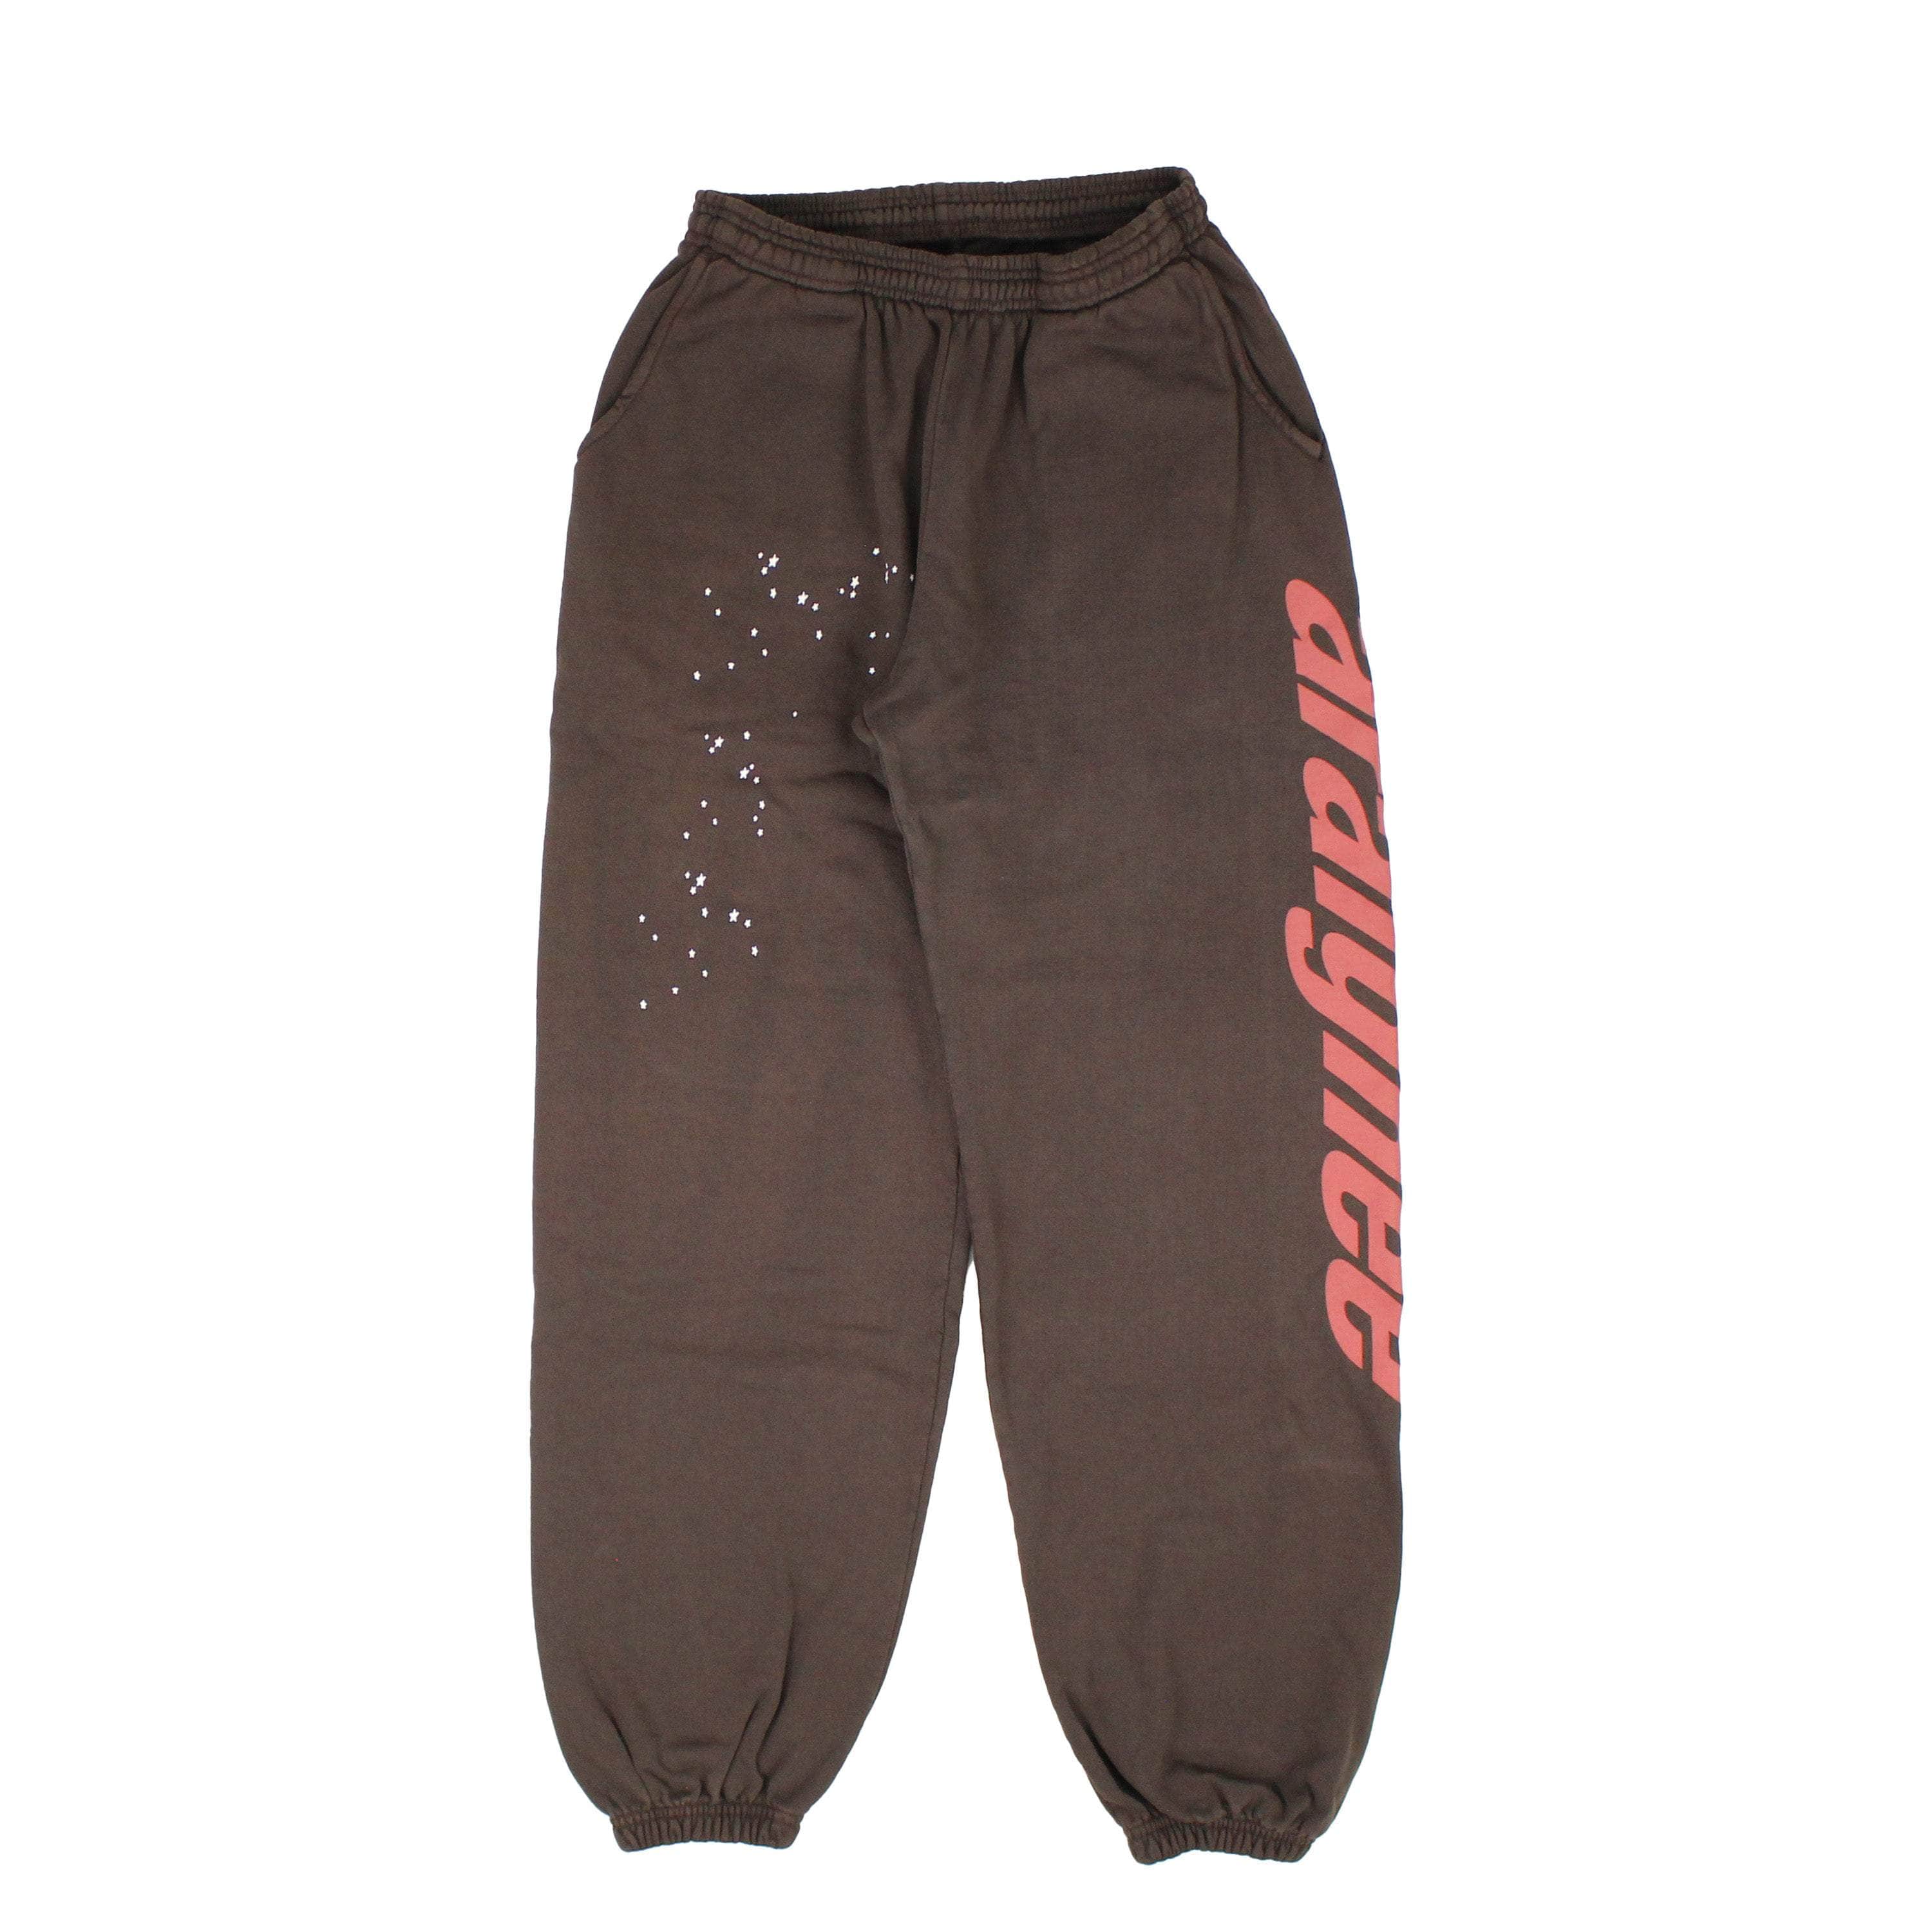 SP5DER 250-500, channelenable-all, chicmi, couponcollection, main-clothing, mens-joggers-sweatpants, shop375, Stadium Goods Araignee Sweatpant